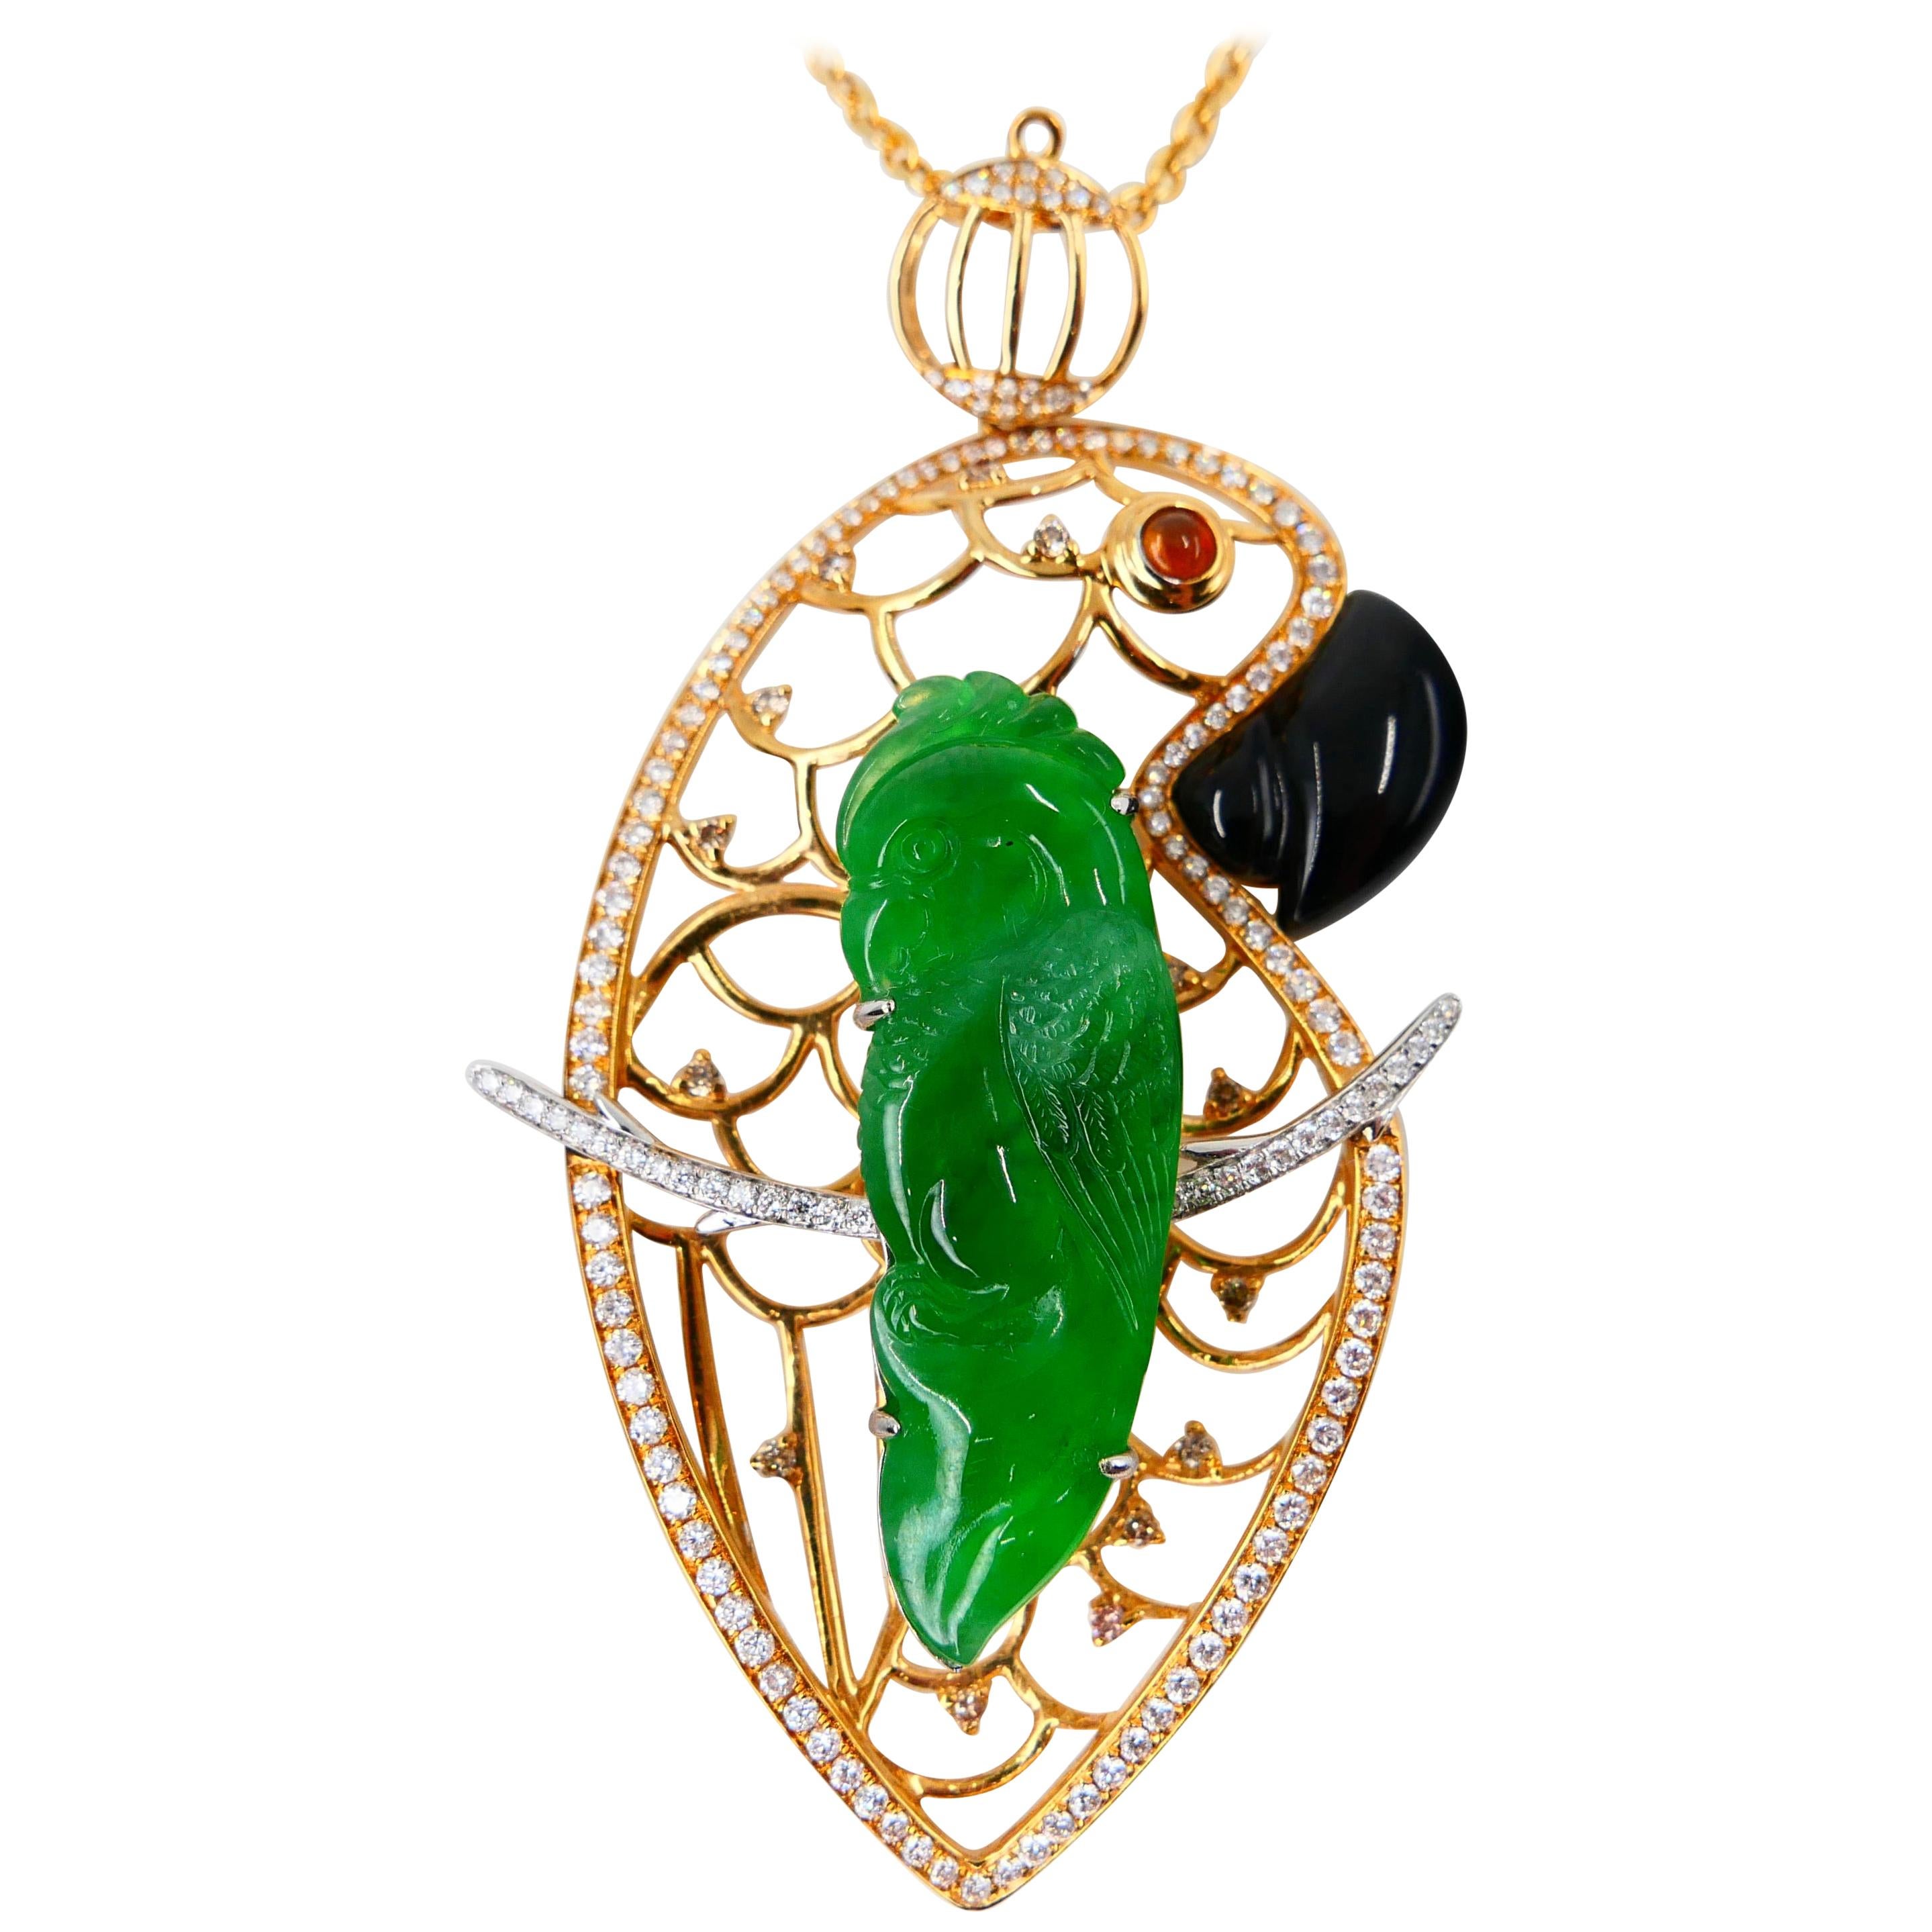 Certified Type A Jadeite Jade and Diamond Parrot Pendant, Vivid Green Color For Sale